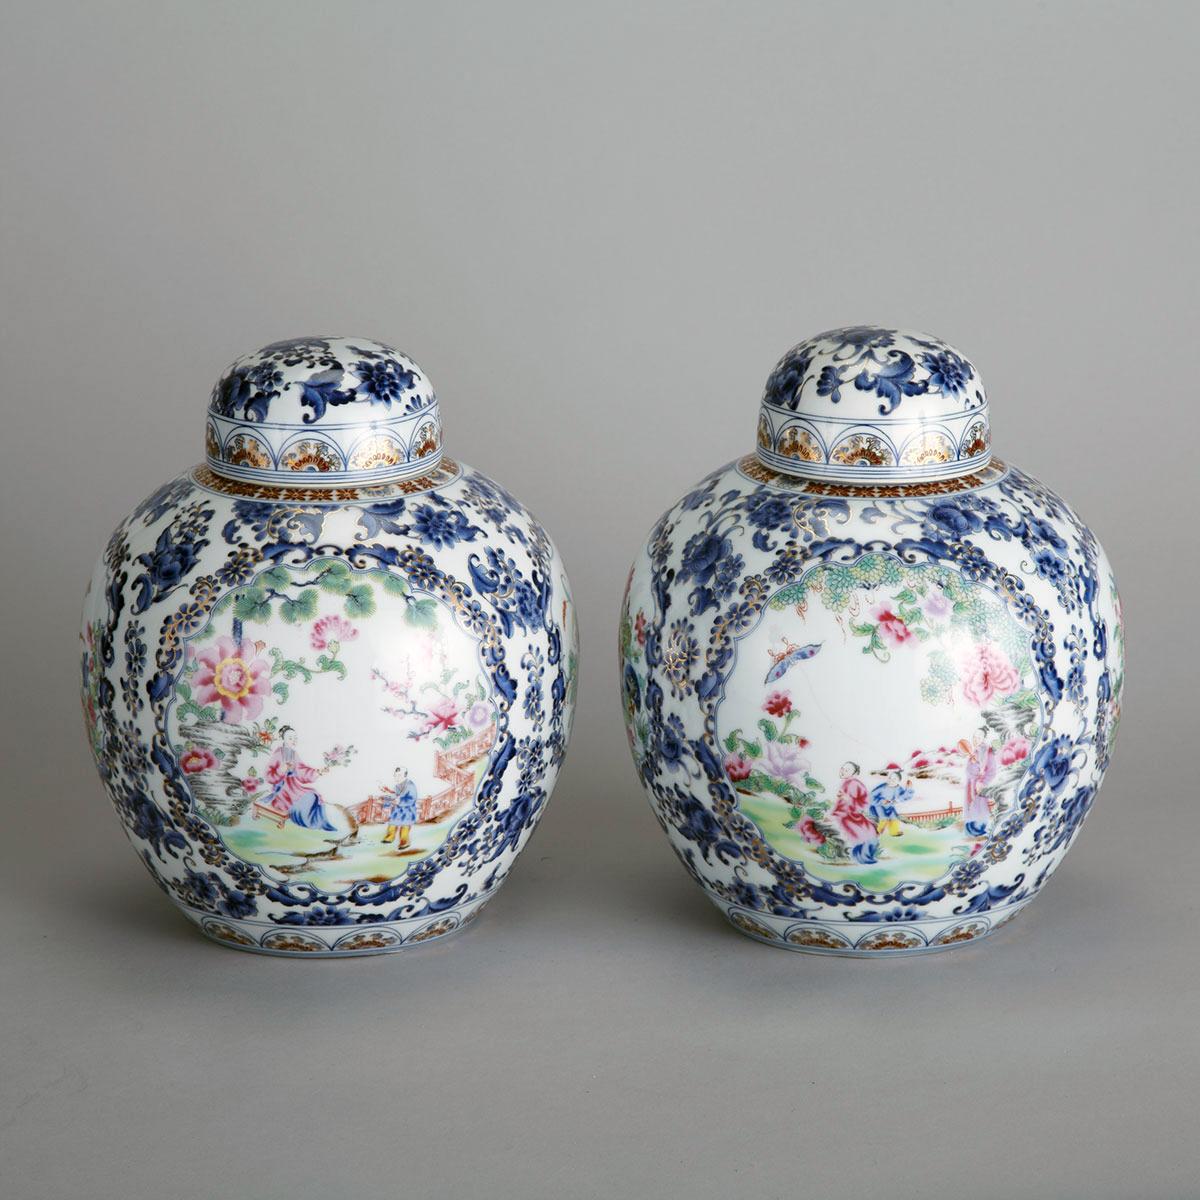 Pair of Export-Style Blue, White, and Famille Rose Ginger Jars